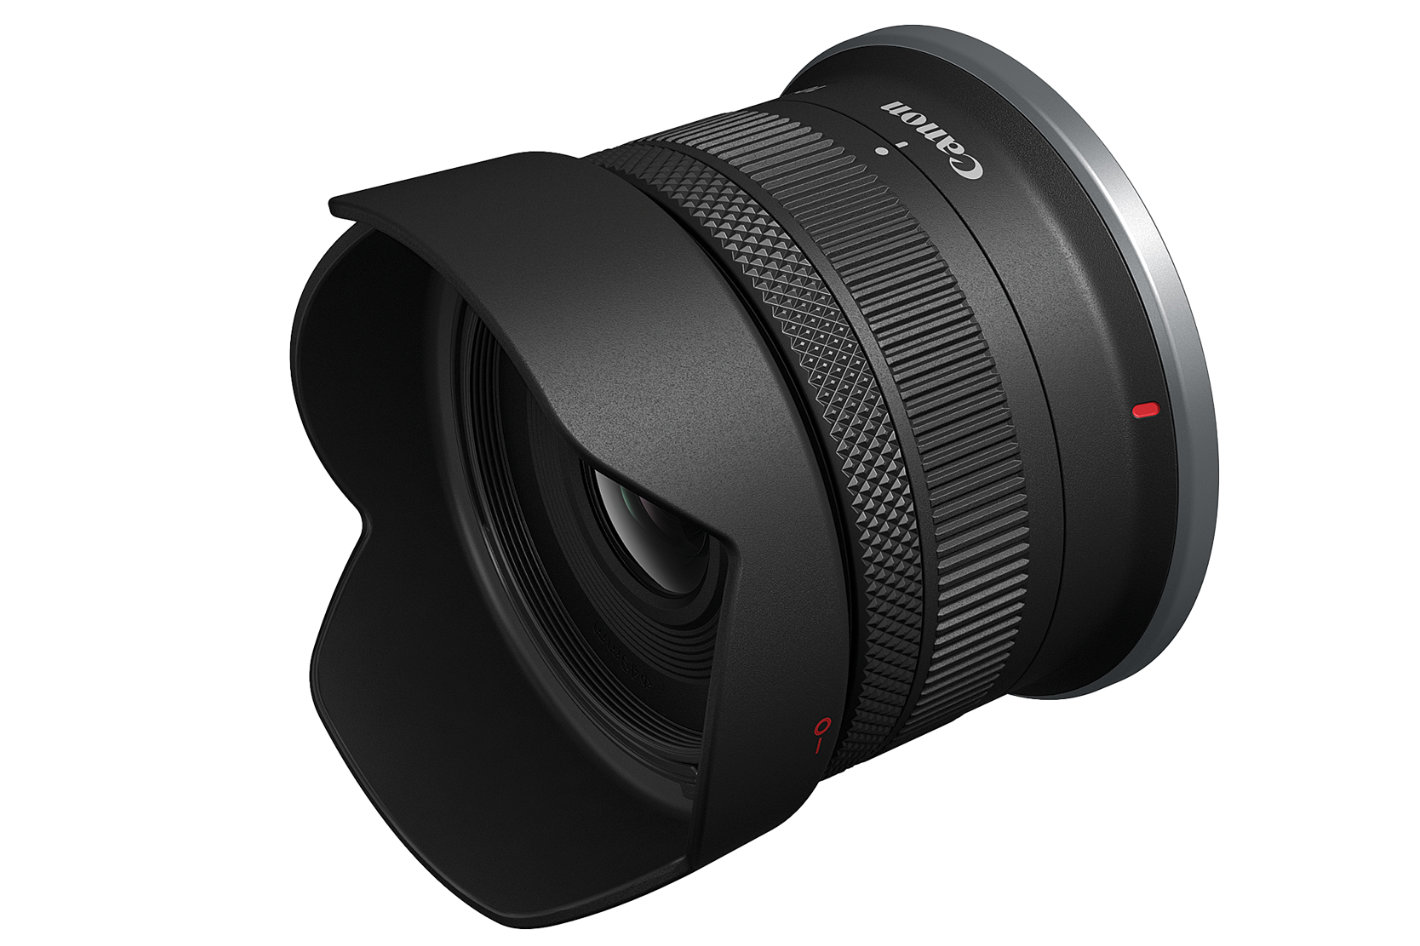 Canon introduces world’s first 24-105mm f/2.8 lens... and two more lenses